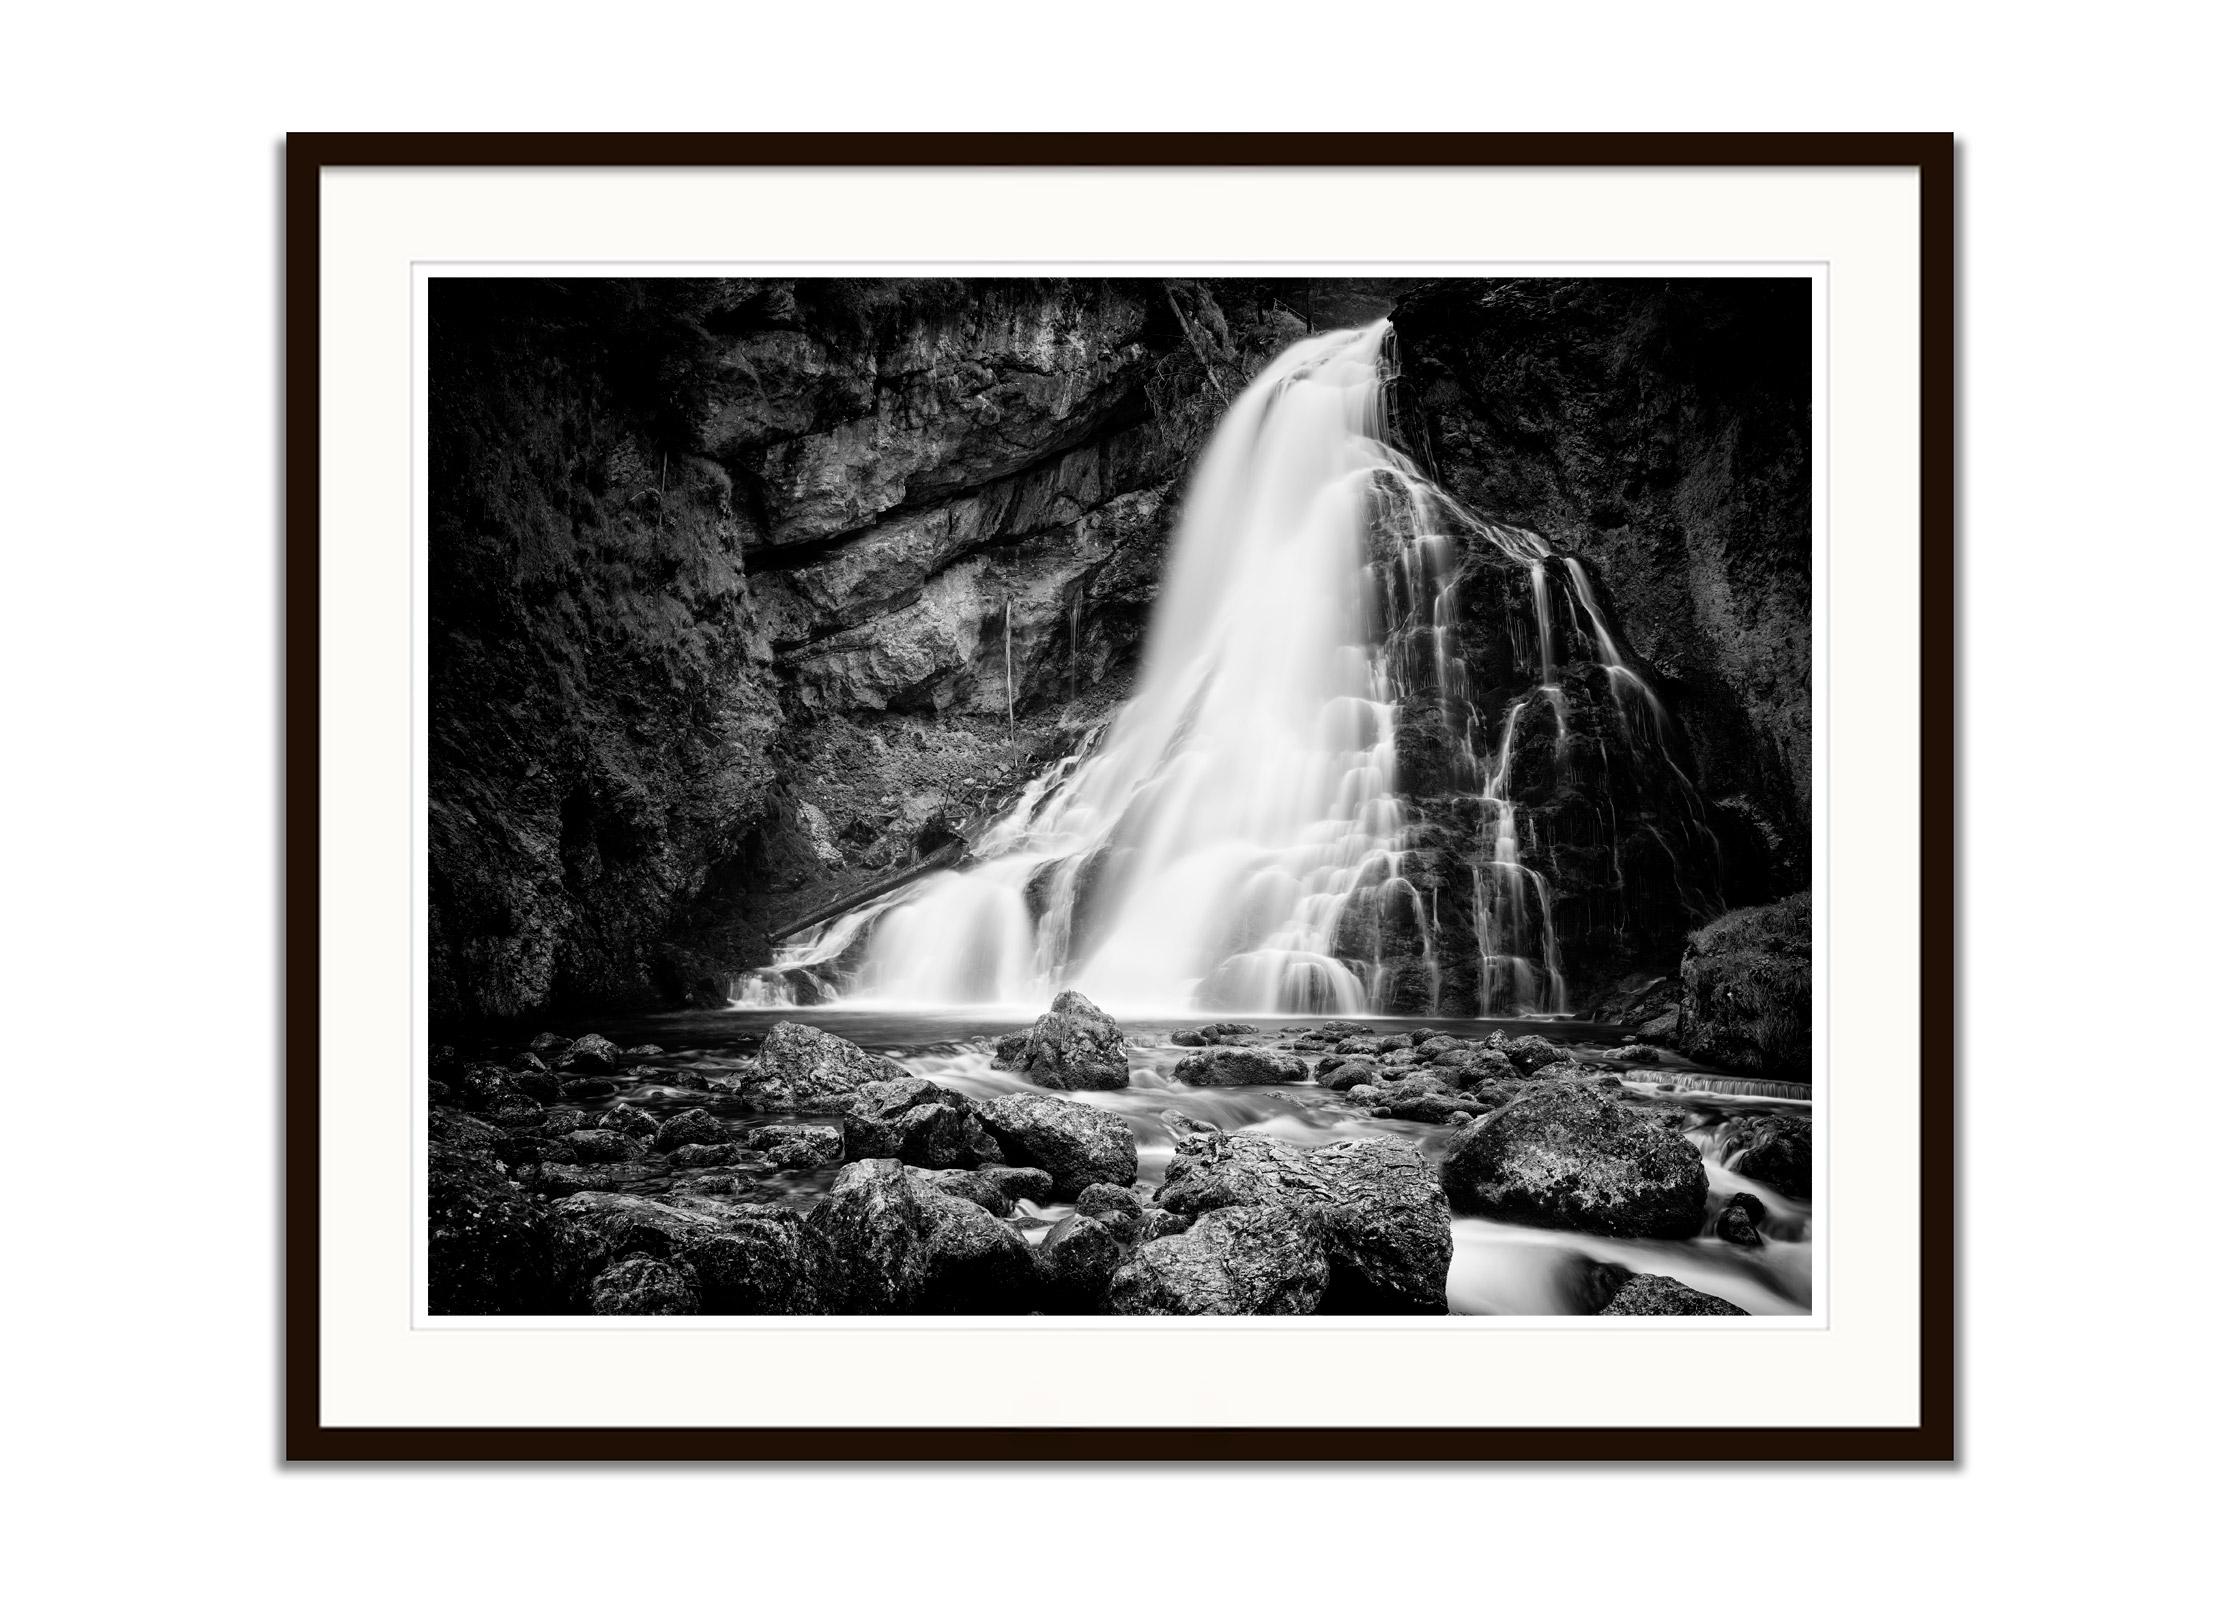 Golling Falls, mountain waterfall, black and white landscape fineart photography - Black Landscape Photograph by Gerald Berghammer